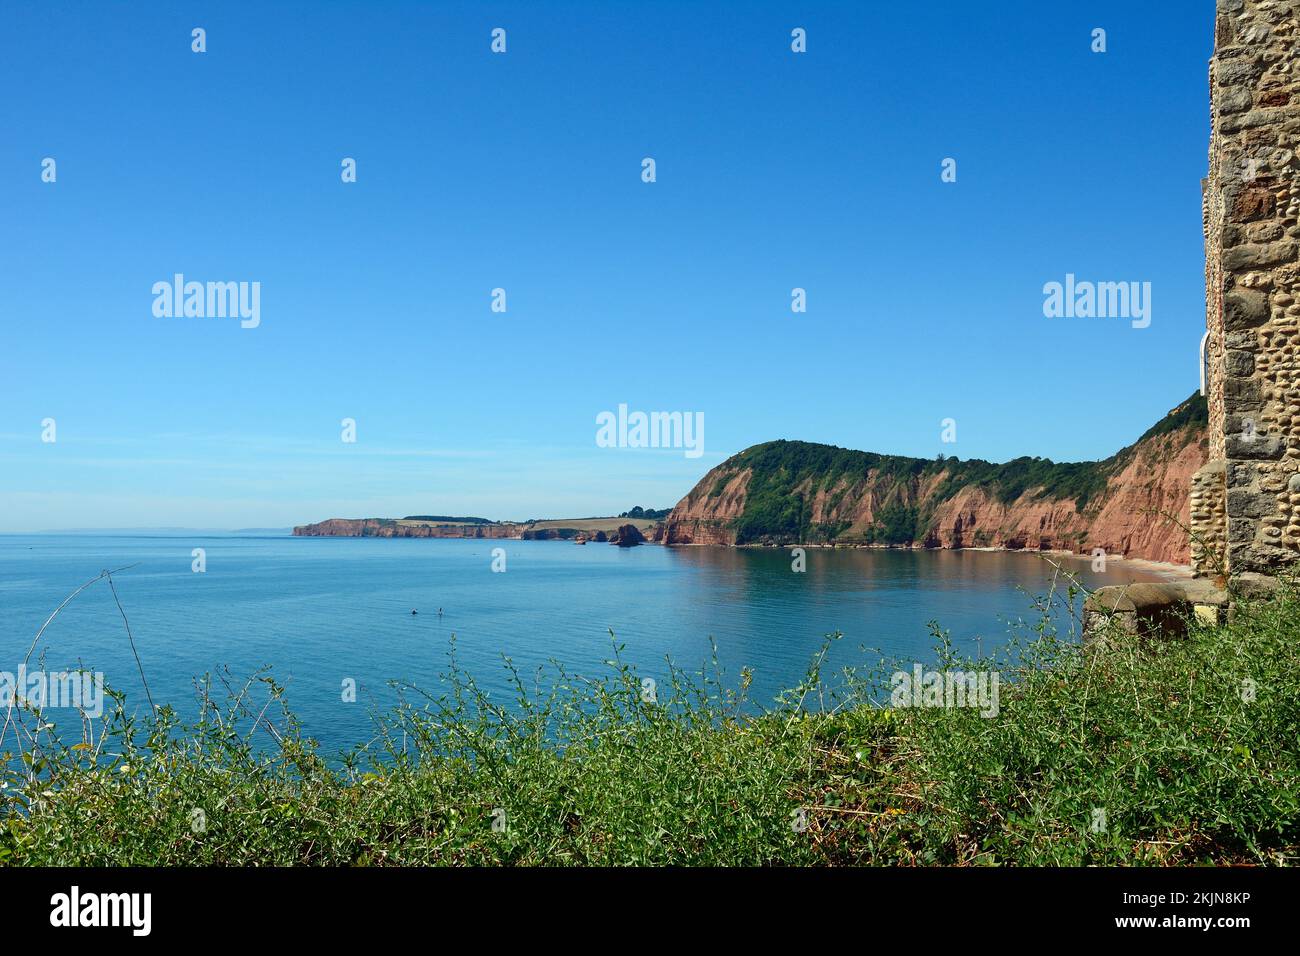 Elevated view of the sea at Jacobs Ladder beach with cliffs and coastline to the rear seen from Connaught Gardens, Sidmouth, Devon, UK, Europe Stock Photo